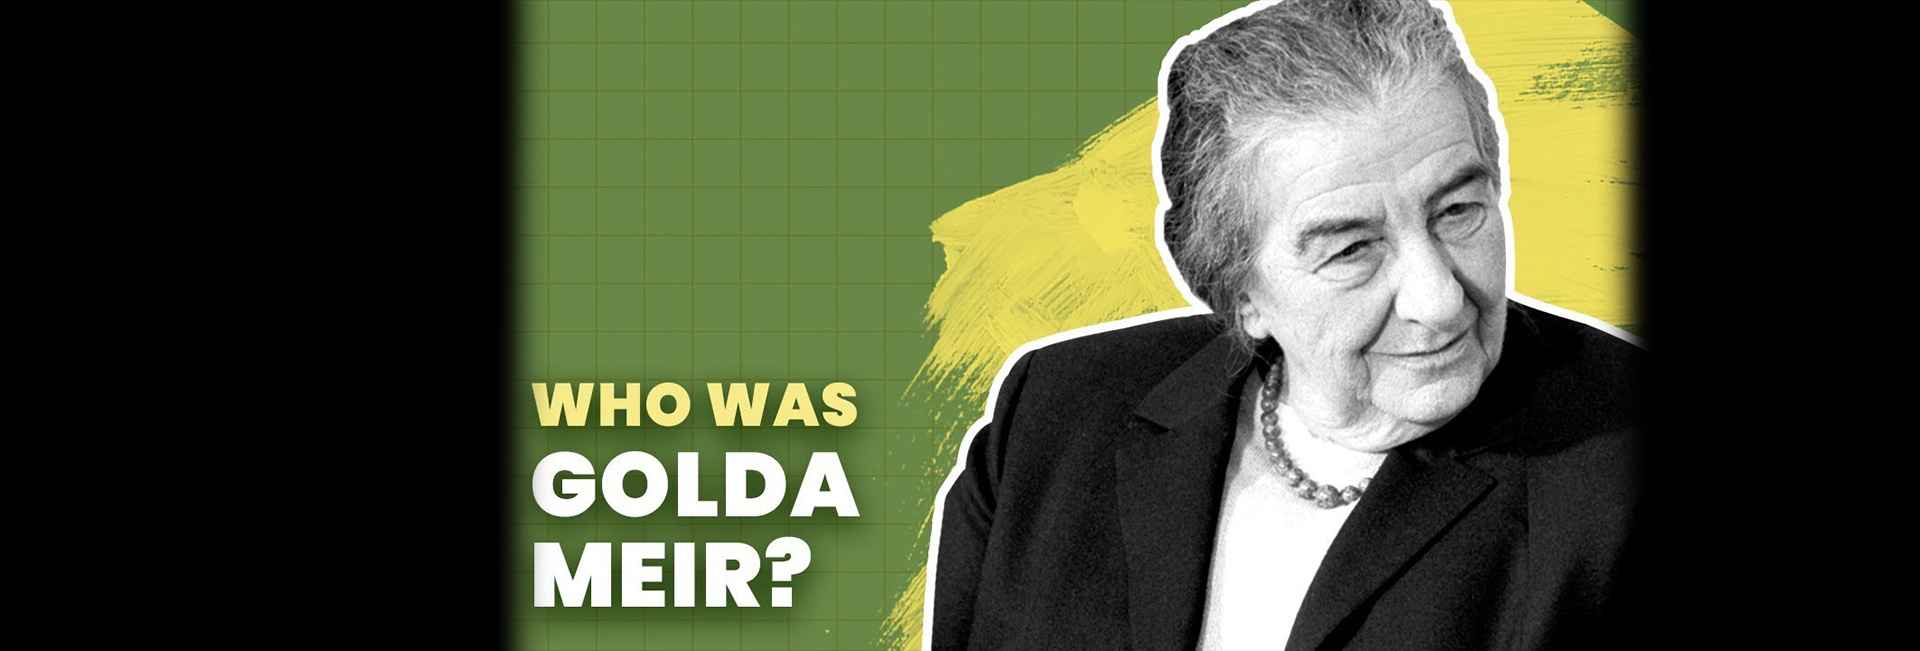 Golda Meir: Iron Lady of the Middle East